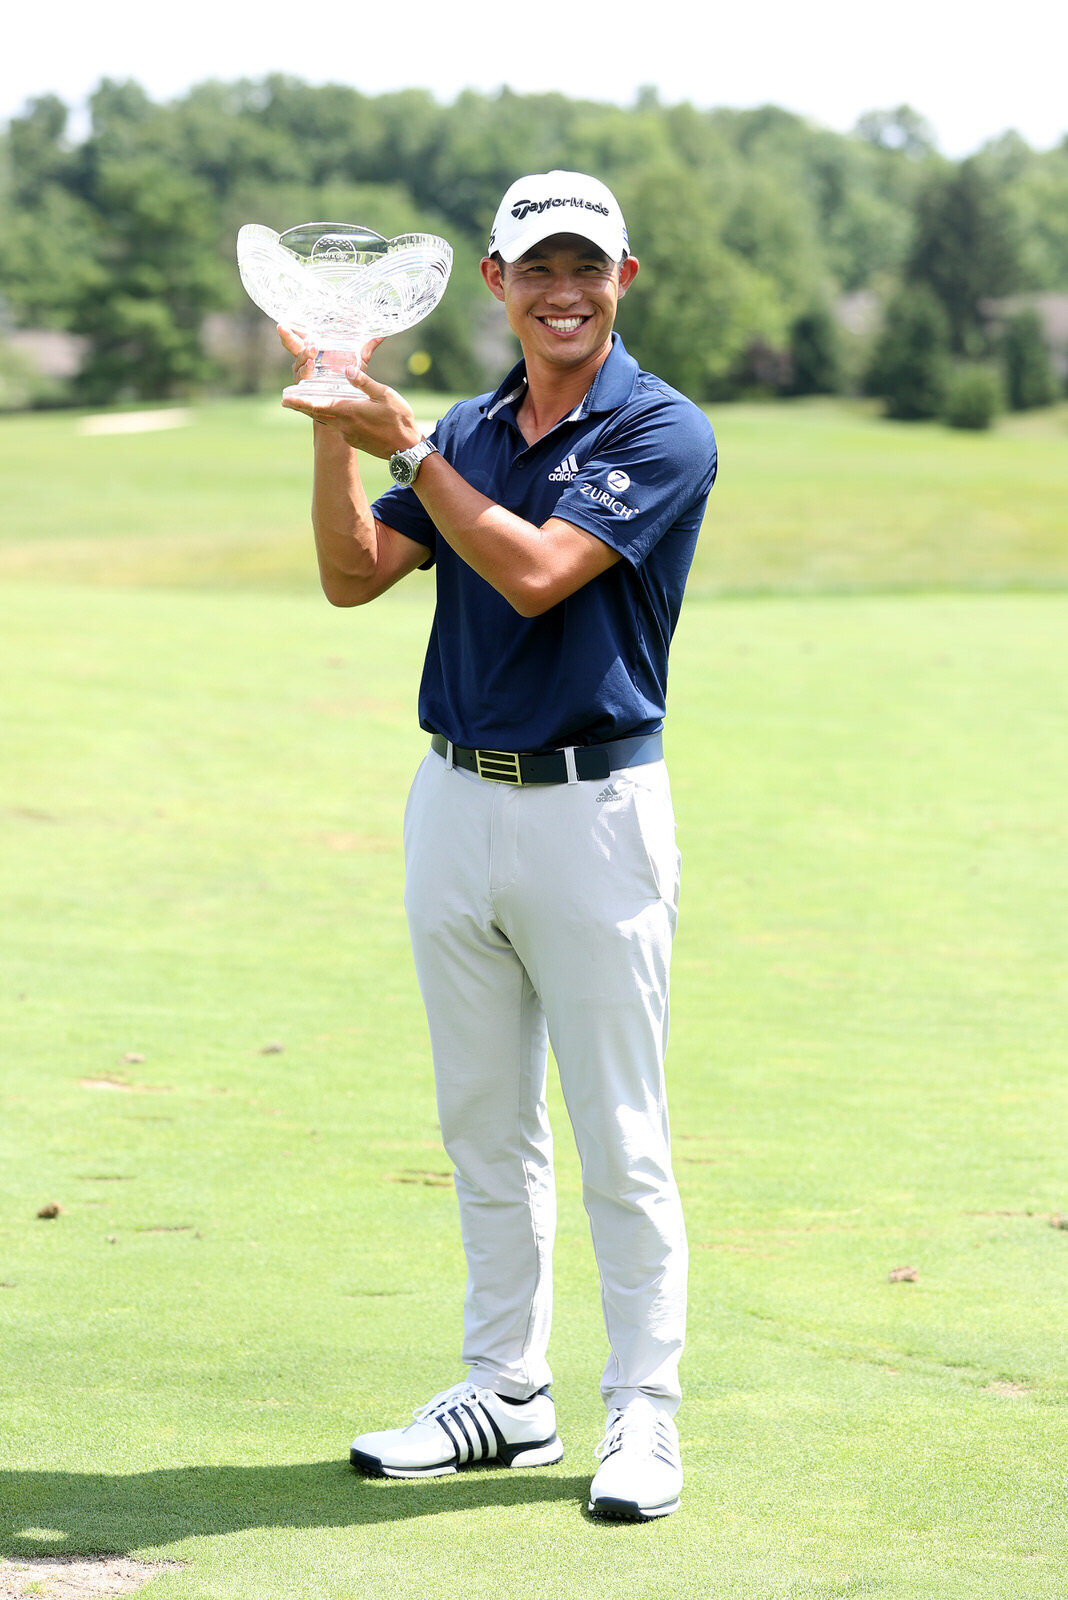  DUBLIN, OHIO - JULY 12: Collin Morikawa of the United States celebrates with the winner's trophy after the final round of the Workday Charity Open on July 12, 2020 at Muirfield Village Golf Club in Dublin, Ohio. (Photo by Gregory Shamus/Getty Images